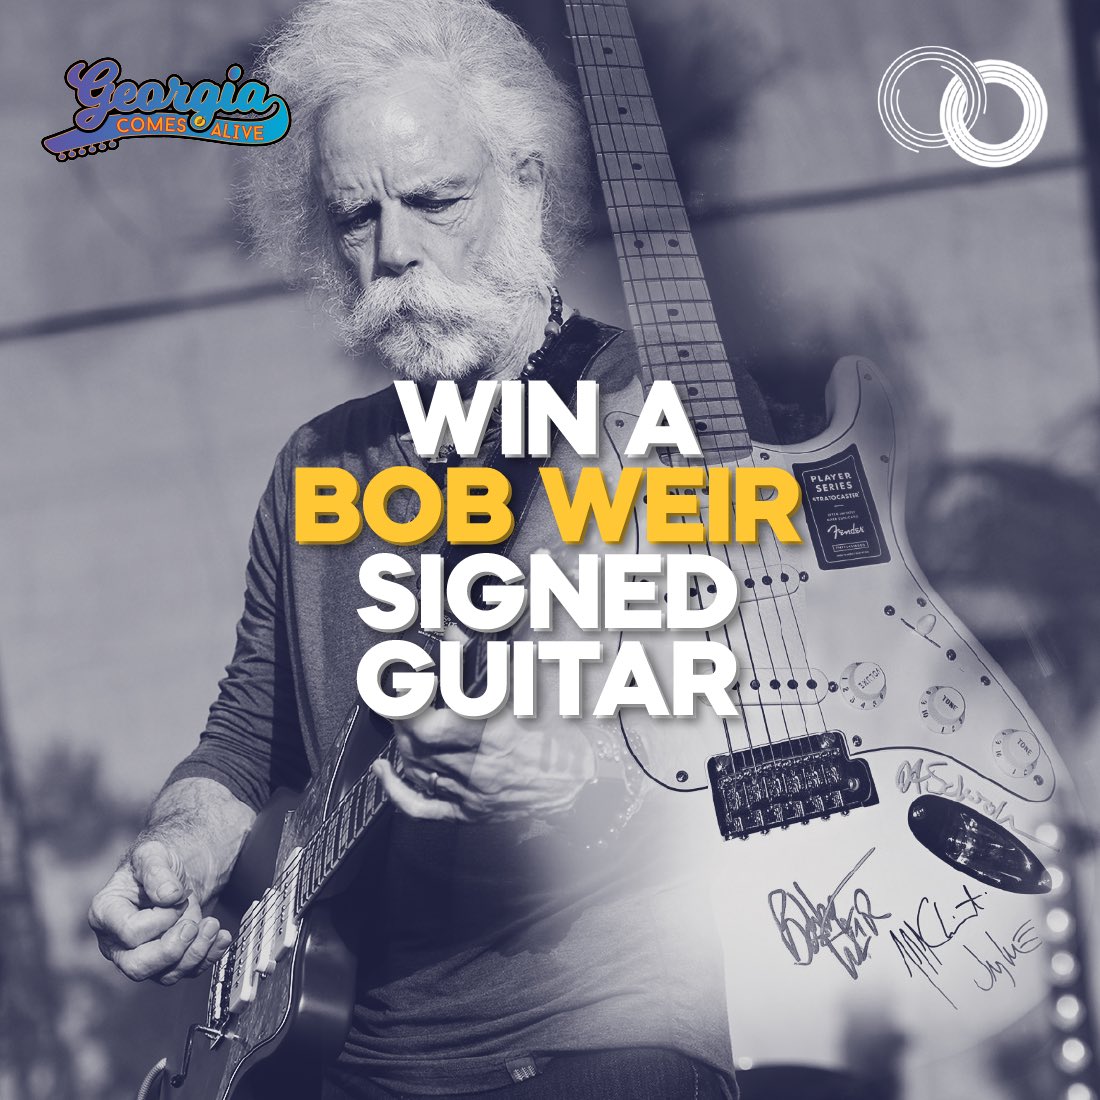 We’re excited to partner with @winwithfandiem to offer @GAComesAlive fans a chance to win an electric guitar signed by @BobWeir, Dave Schools, Jeff Chimenti, & Jay Lane! Enter by donating here: fandiem.com/products/win-a…